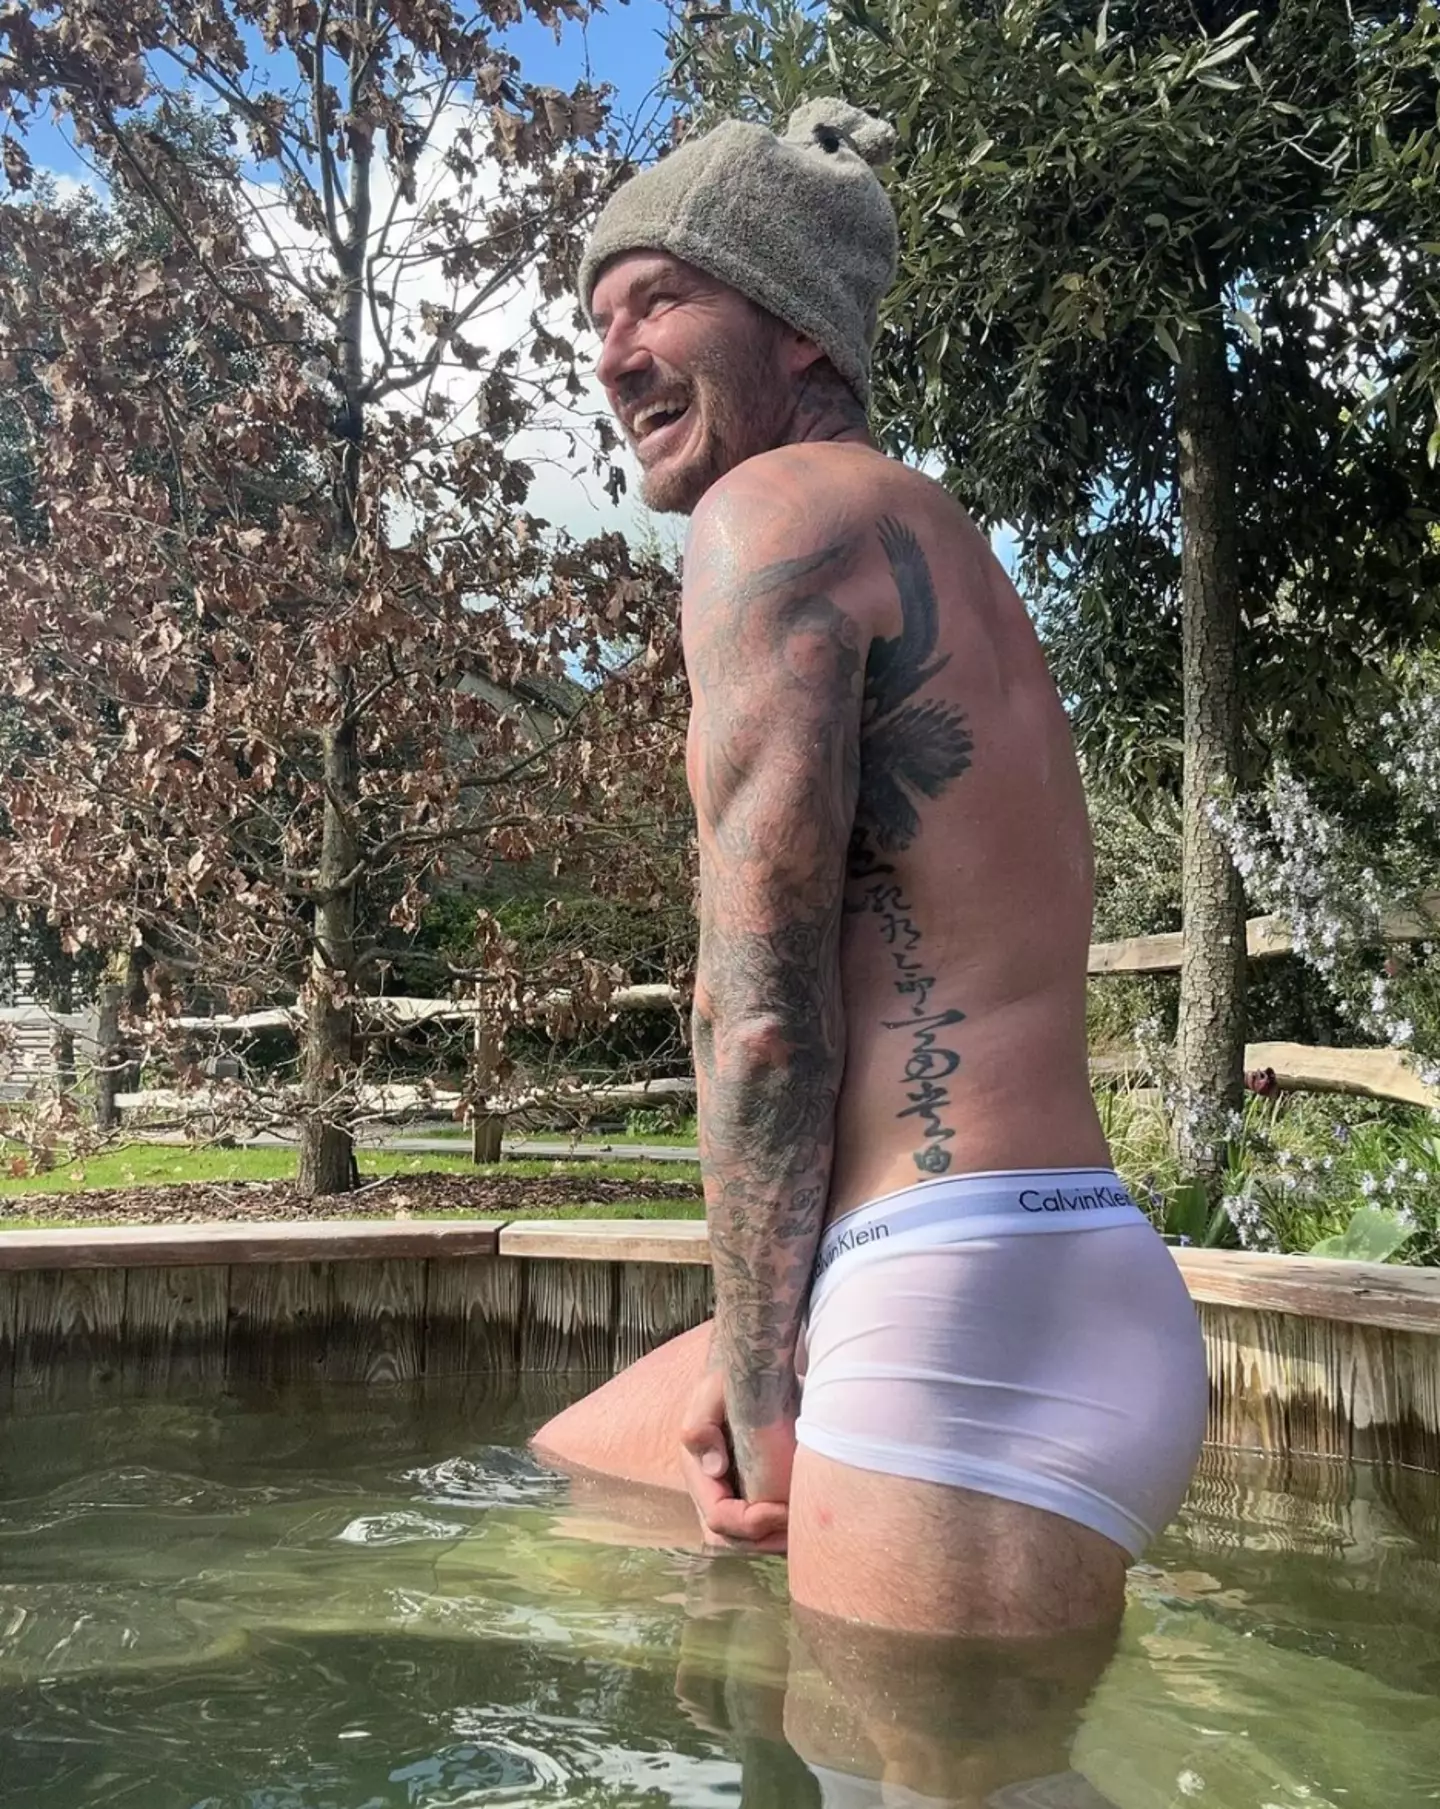 David Beckham struggled to hide his laughter in the birthday snap.